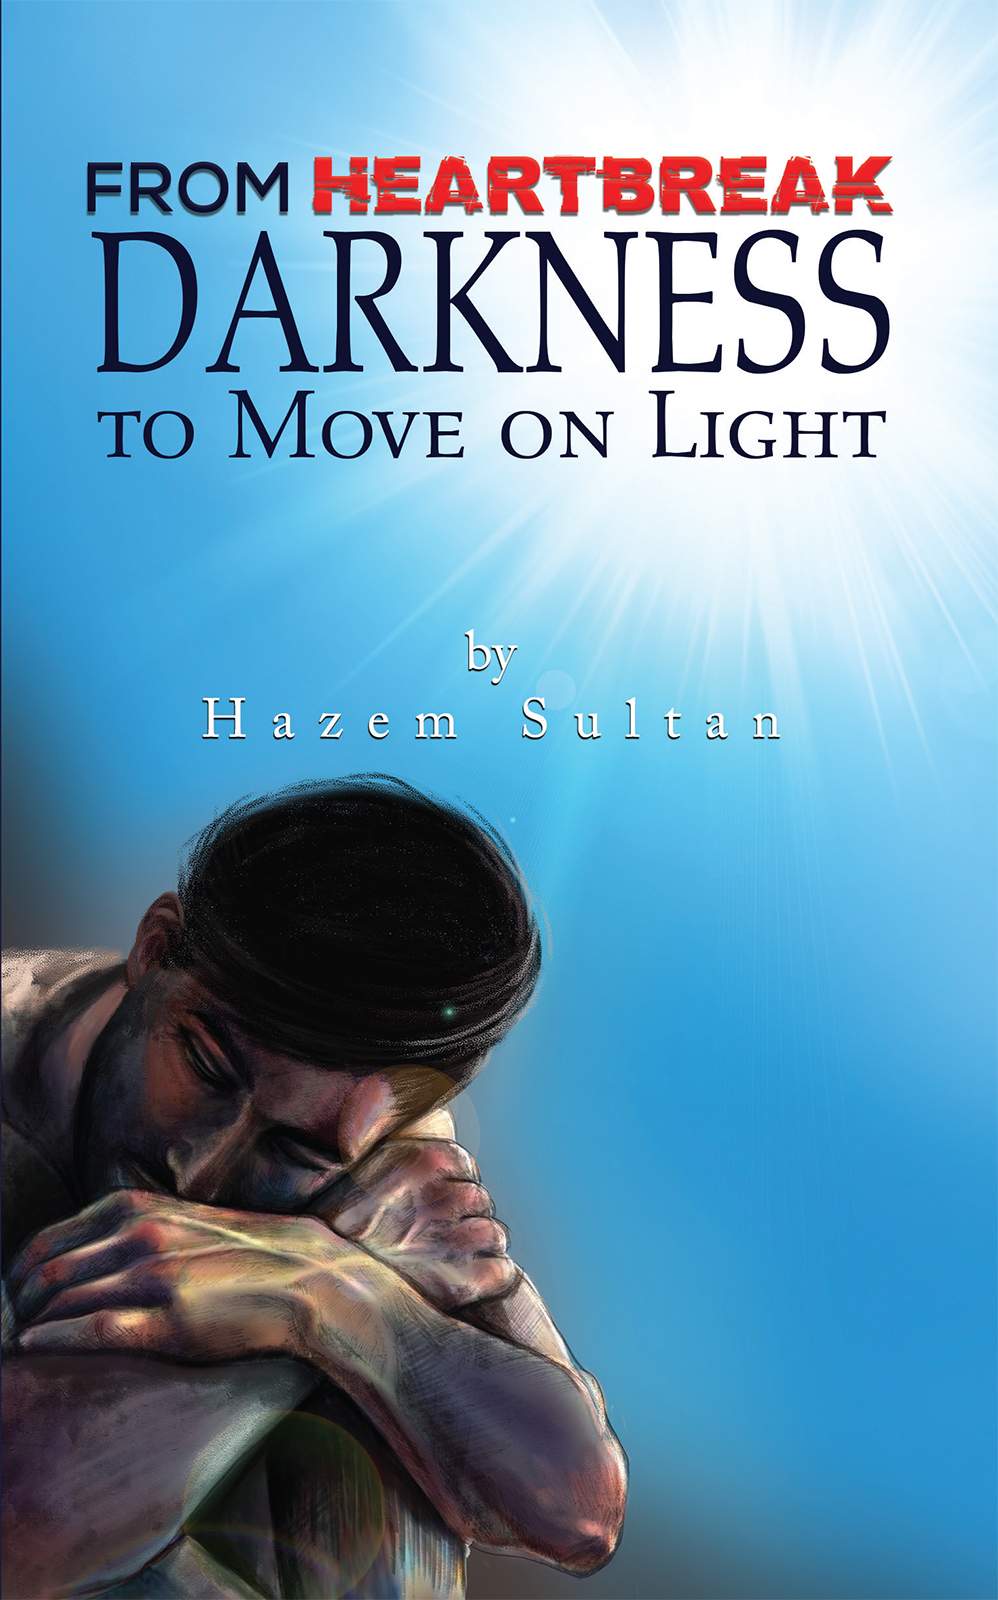 From Heartbreak Darkness to Move on Light